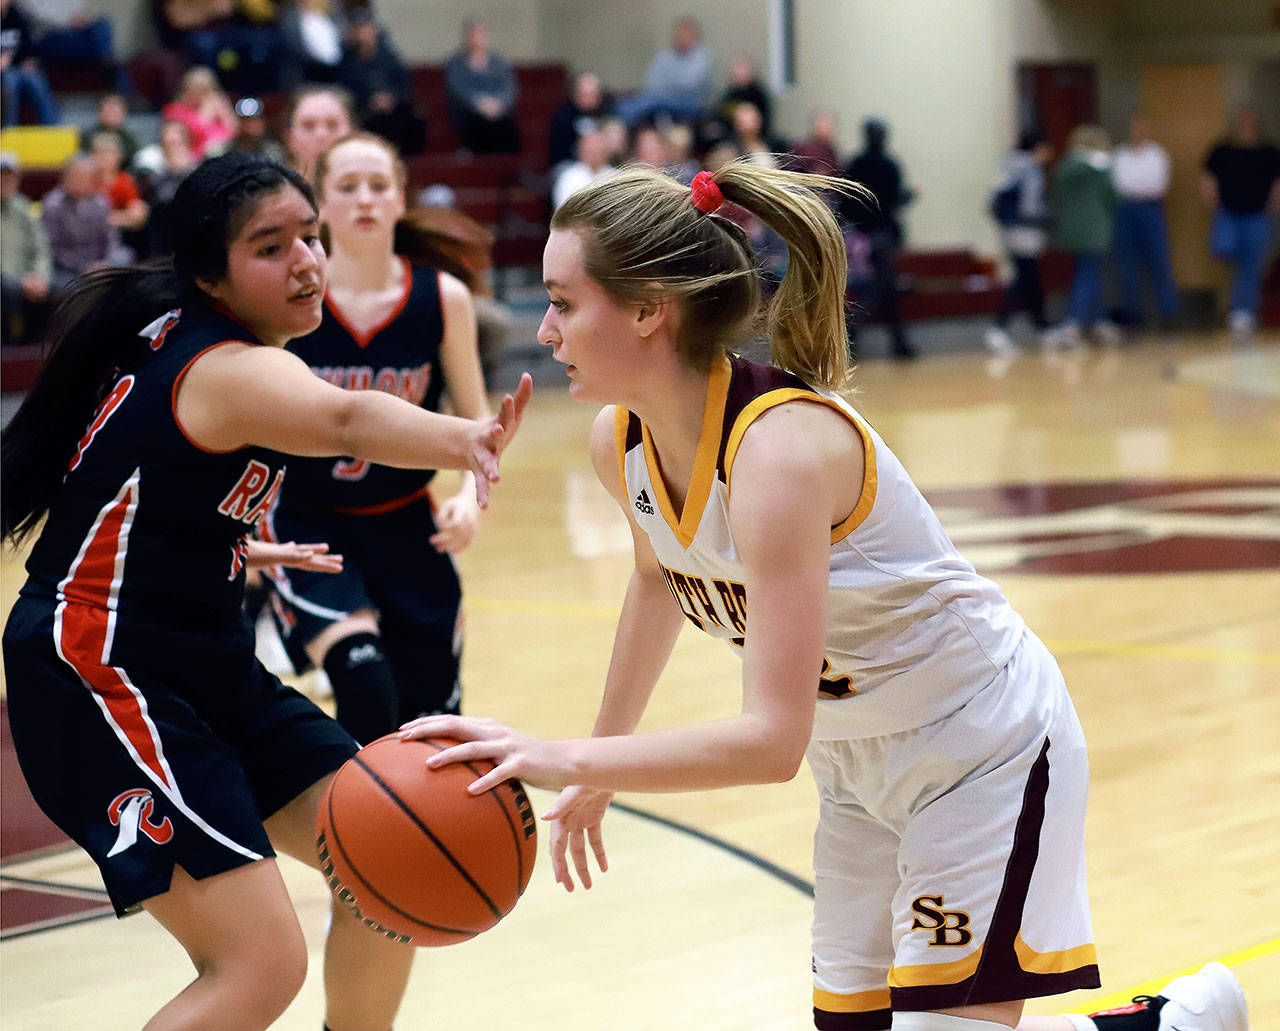 South Bend’s Karley Reidinger, right, drives to the hoop in a win over Raymond on Wednesday. South Bend earned a No. 4 seed and a first-round bye in this week’s 2B District IV Tournament. (Photo by Larry Bale)